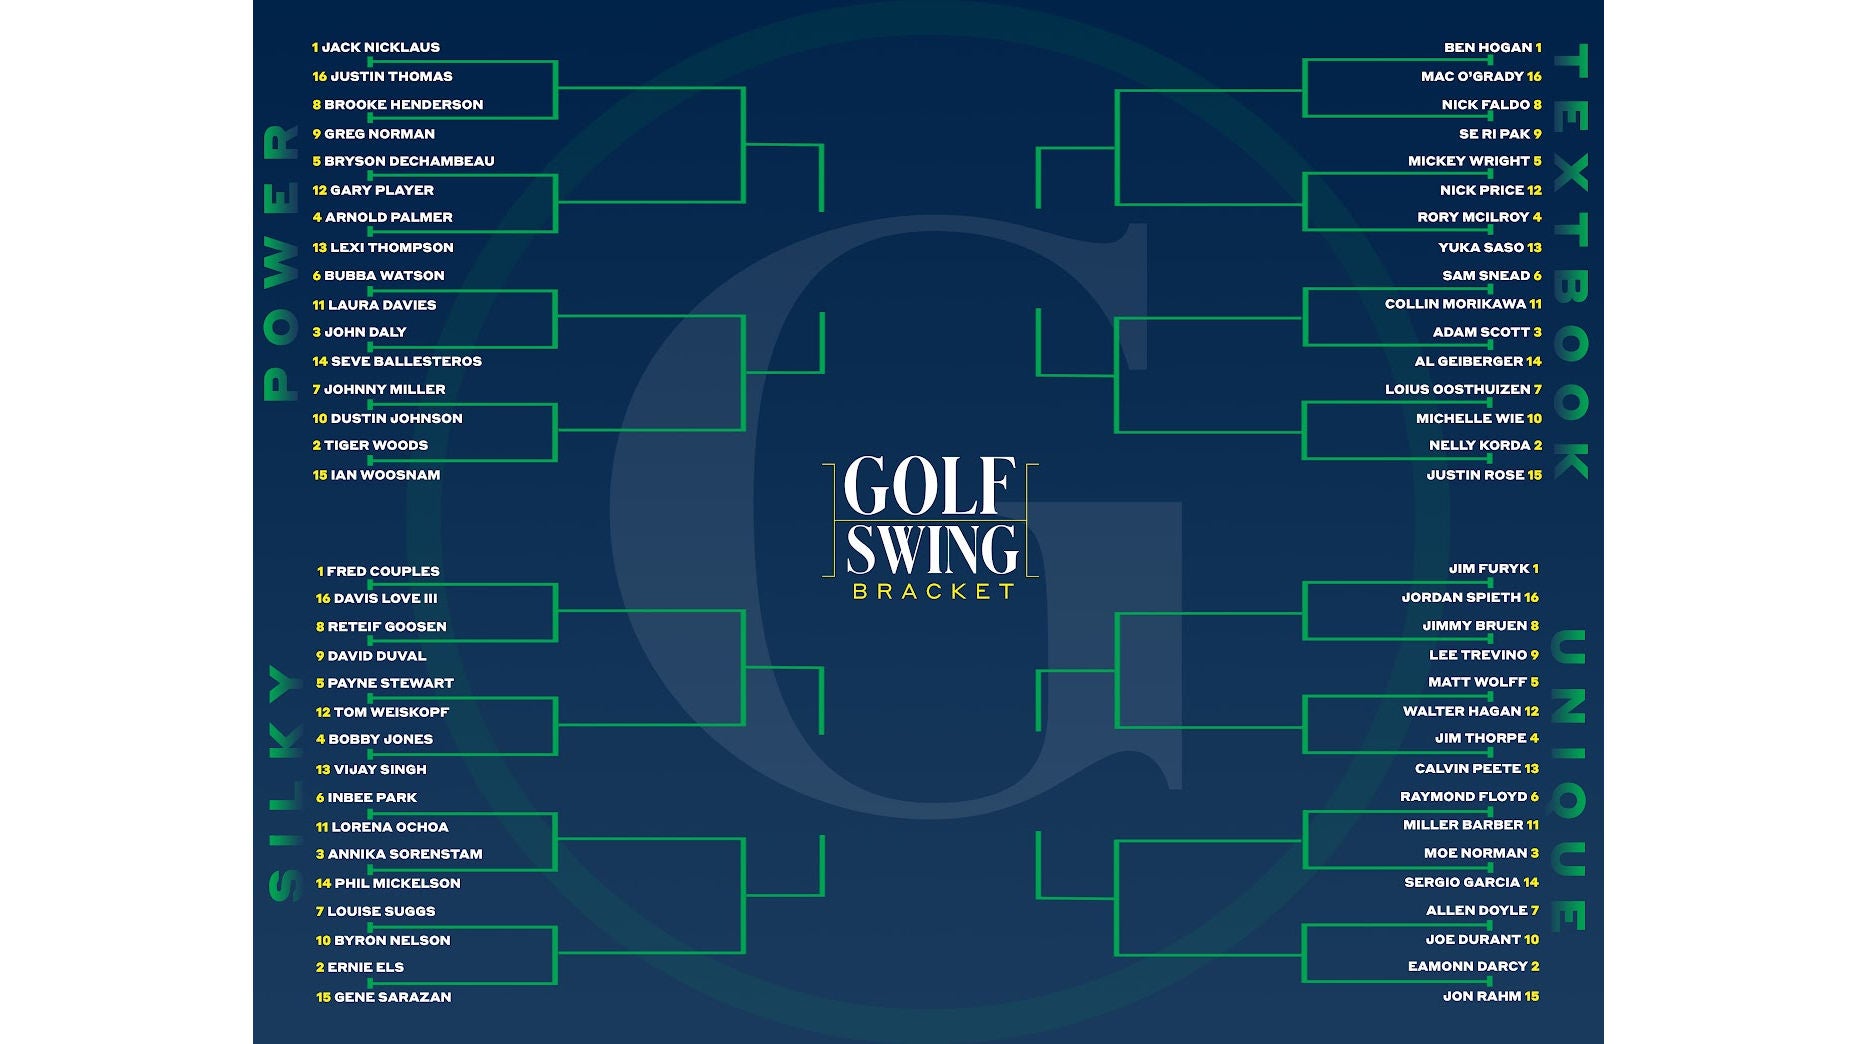 Vote on your favorite golf swing! Introducing the golf swing March Madness bracket